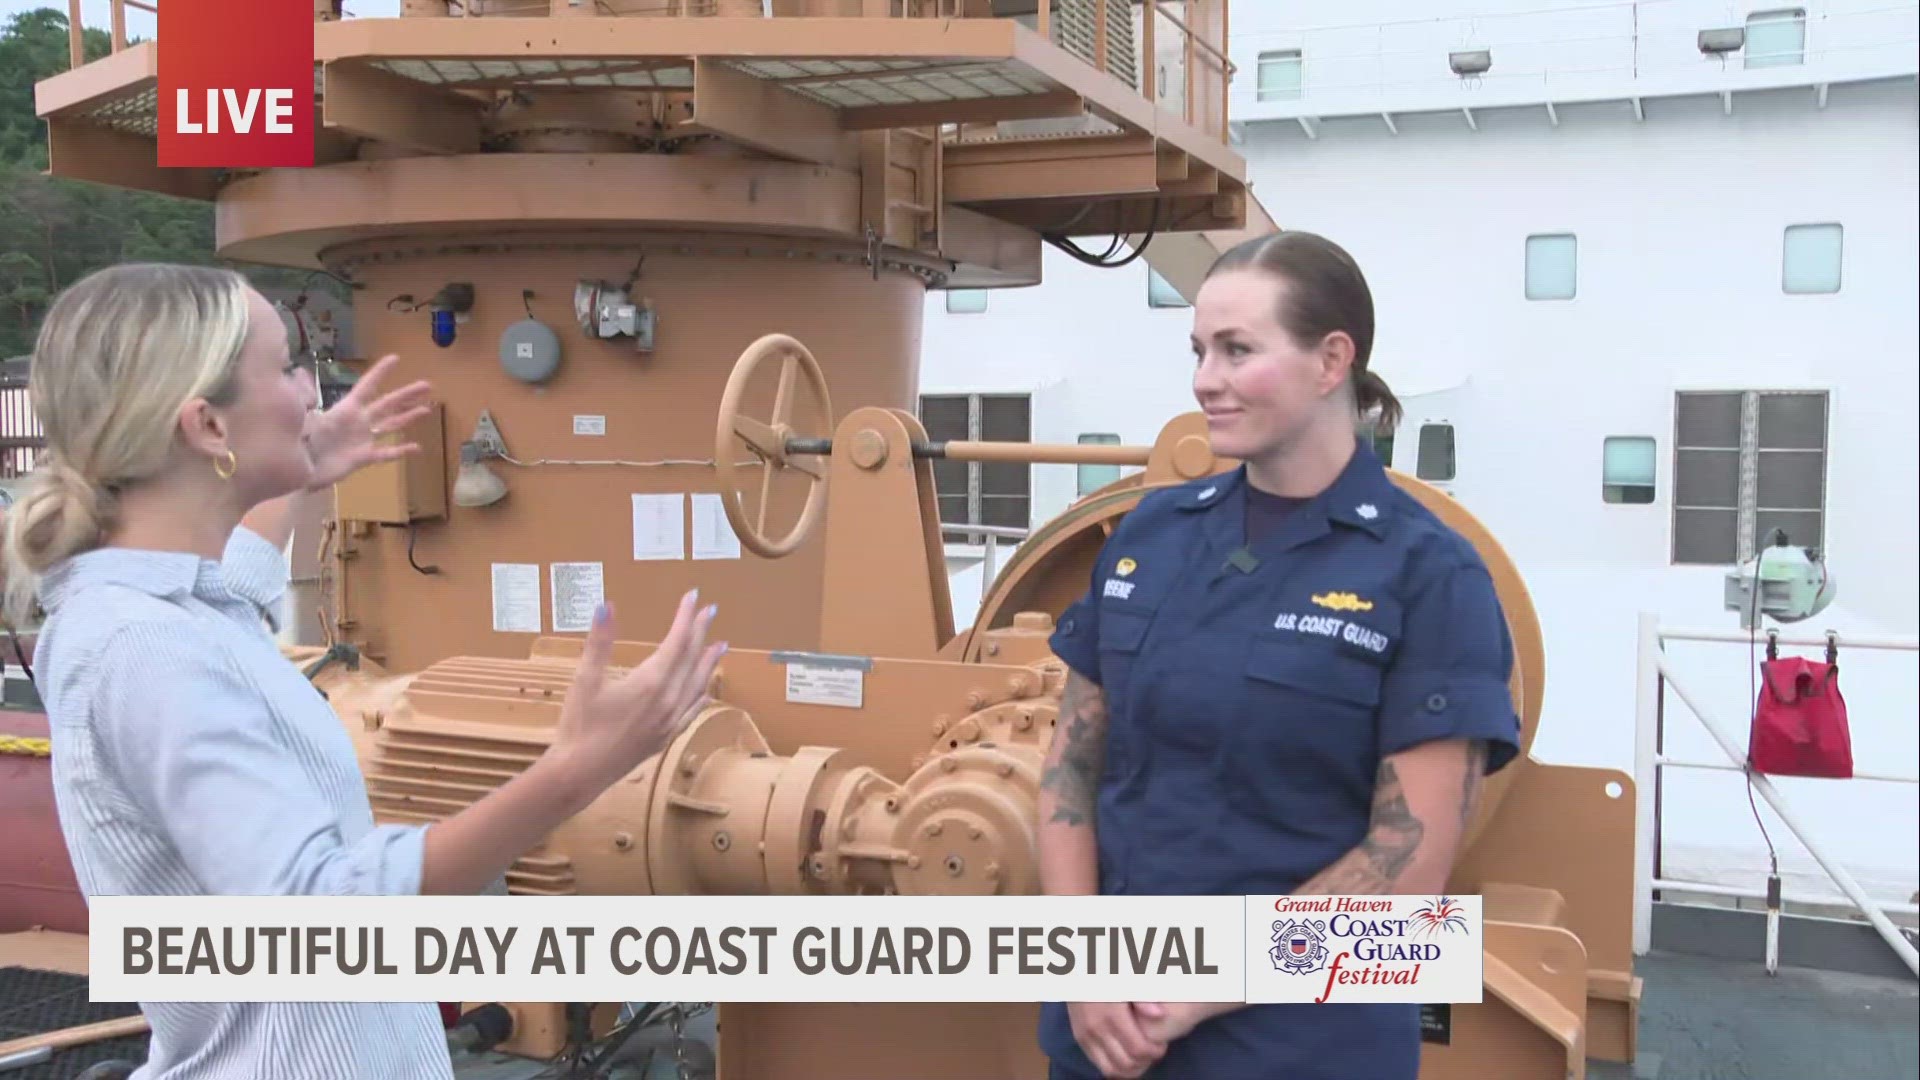 Several ships are available for tours throughout the Coast Guard Festival, which is underway in Grand Haven until Aug. 6.